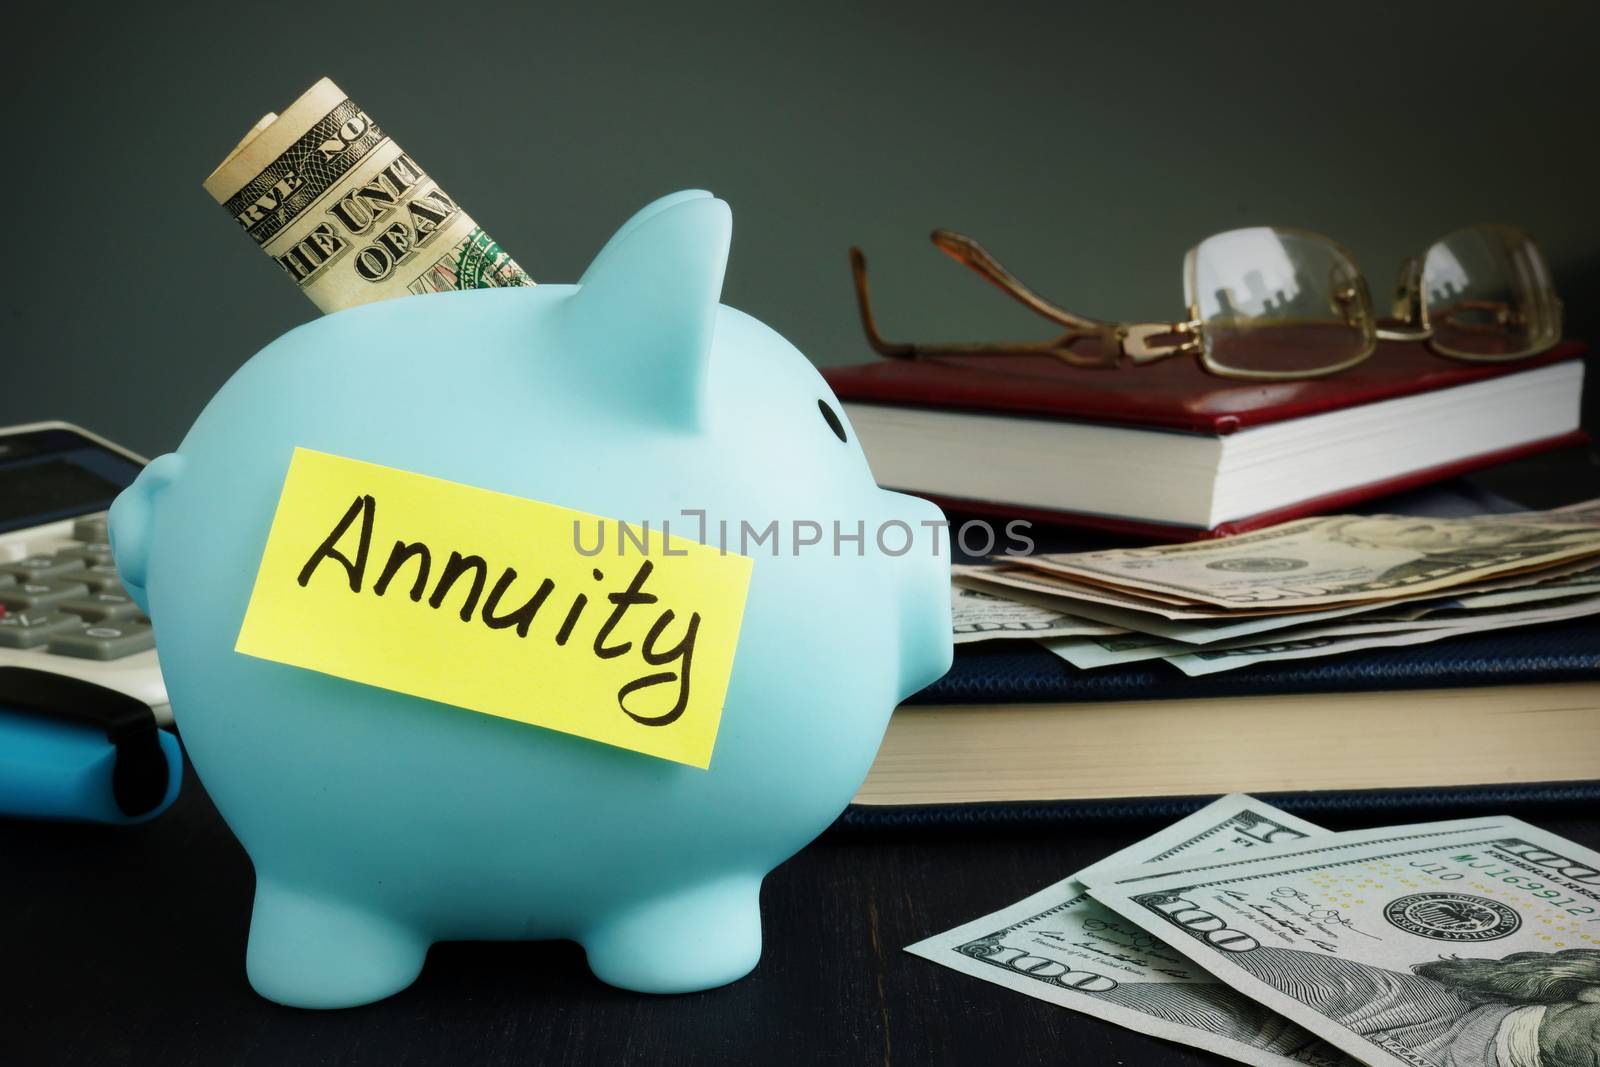 Annuity written on yellow sheet and piggy bank with money.